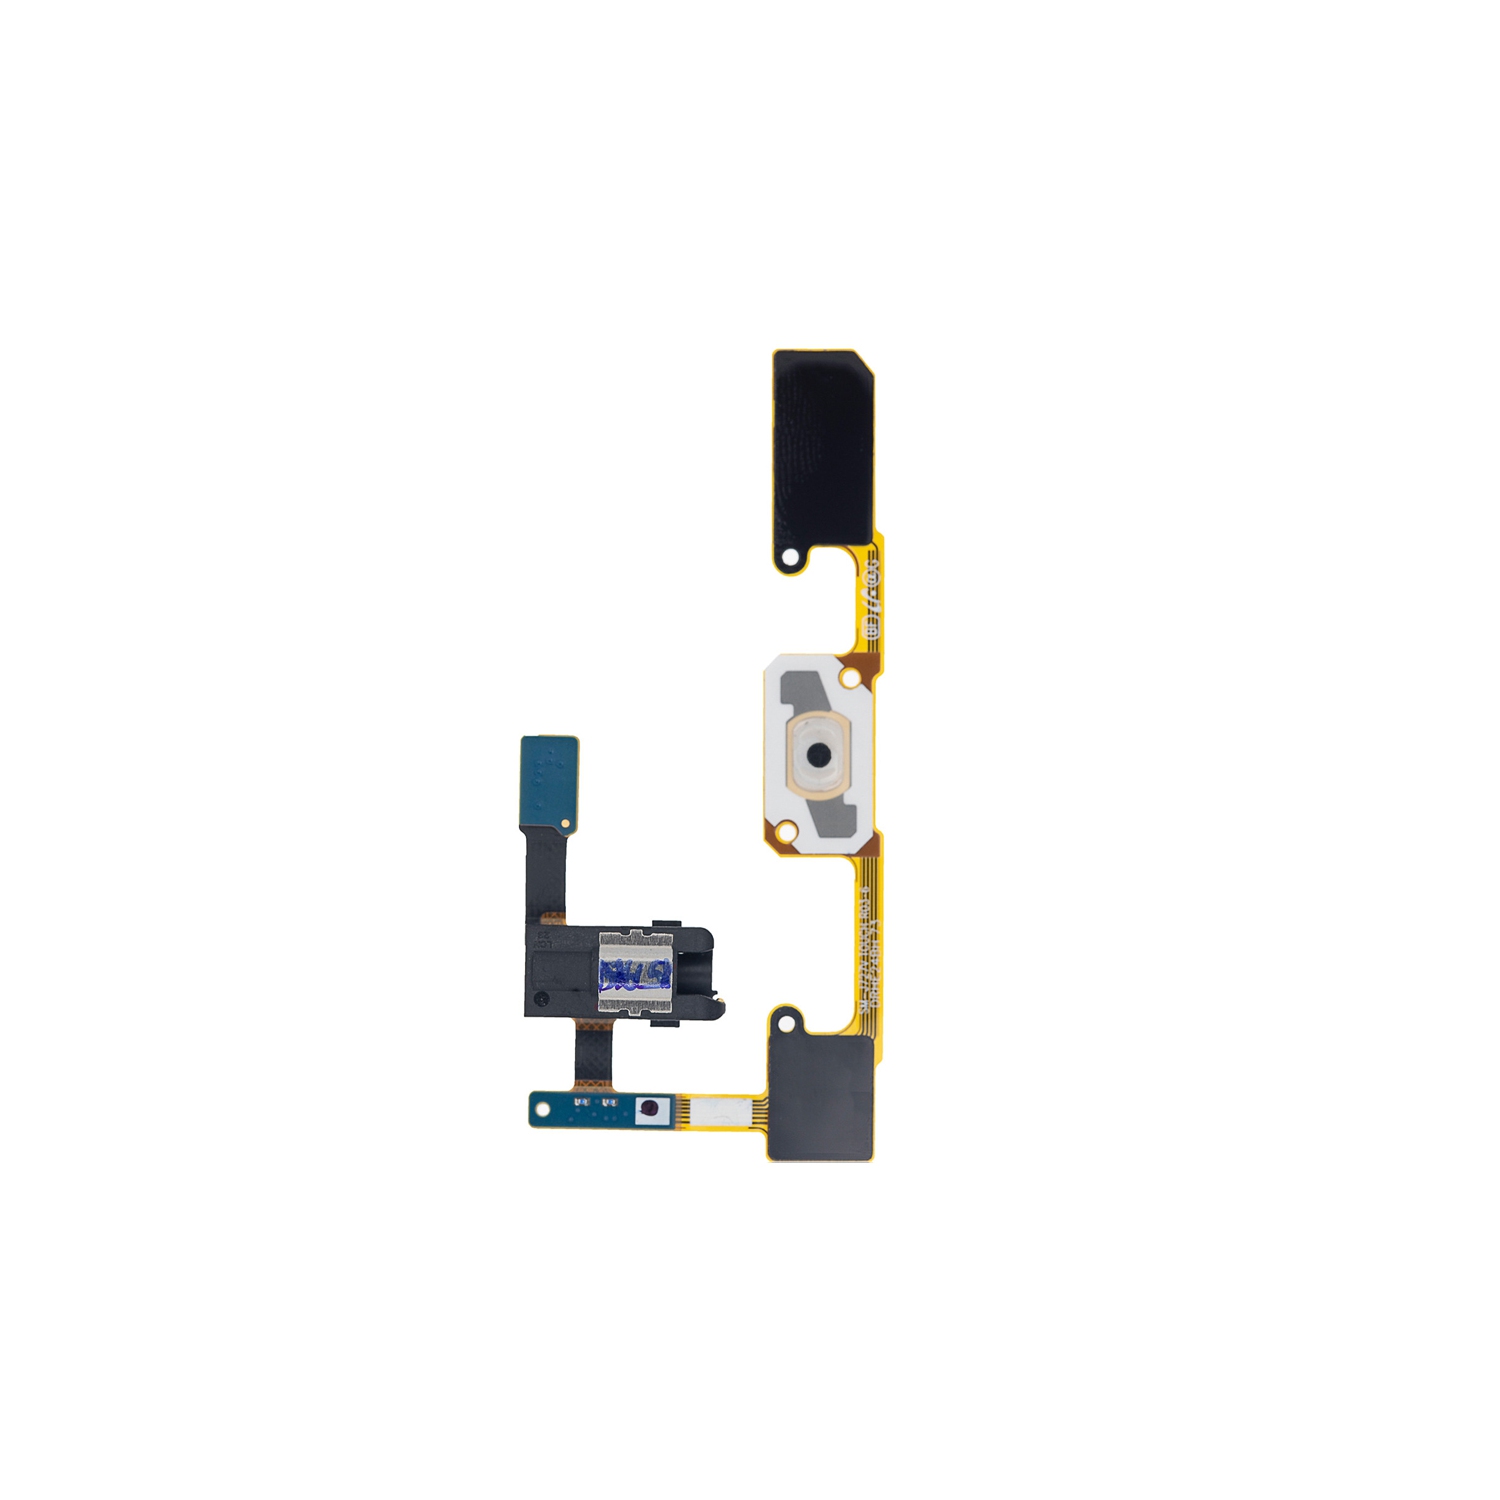 Replacement Home Button With Headphone Jack Flex For Samsung Galaxy J7 / J7 Star (2018)